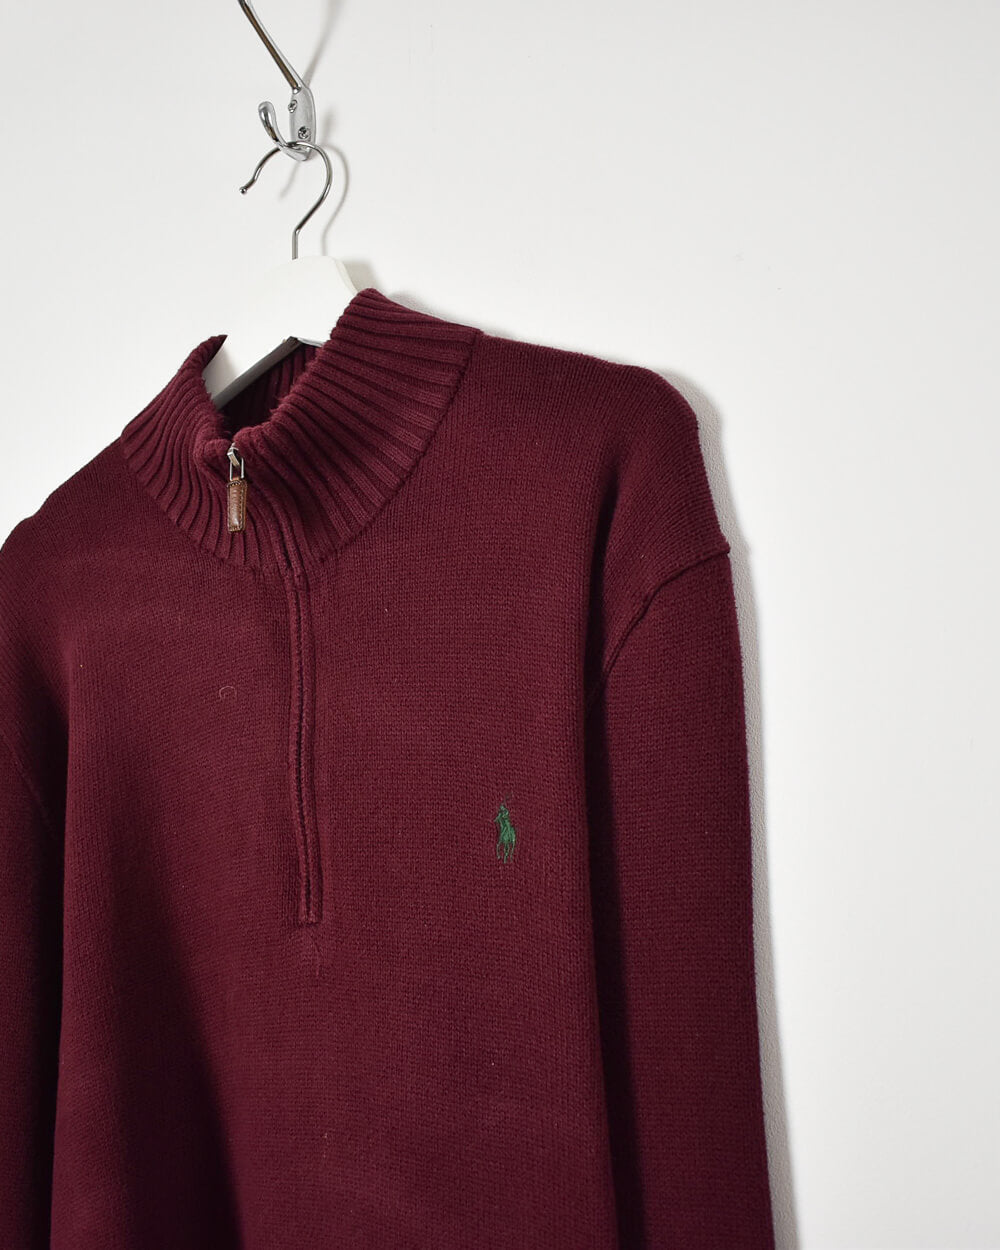 Ralph Lauren 1/4 Zip Knitted Sweatshirt - X-Large - Domno Vintage 90s, 80s, 00s Retro and Vintage Clothing 